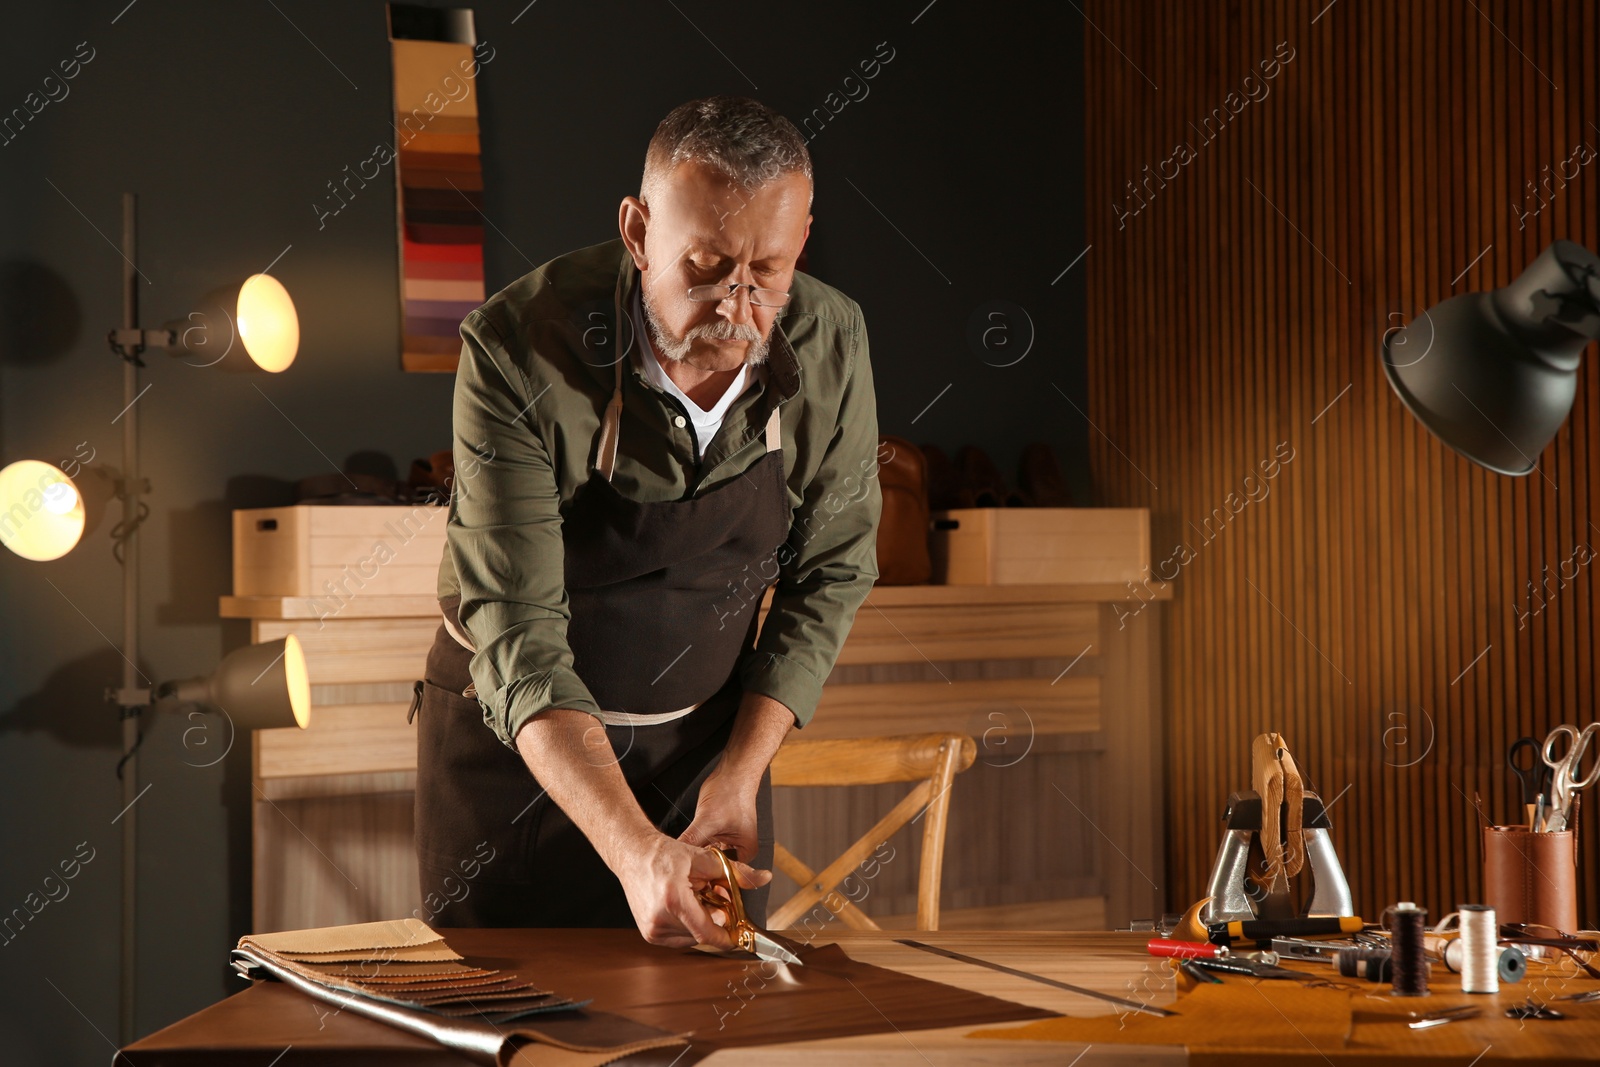 Photo of Man cutting leather with scissors in workshop